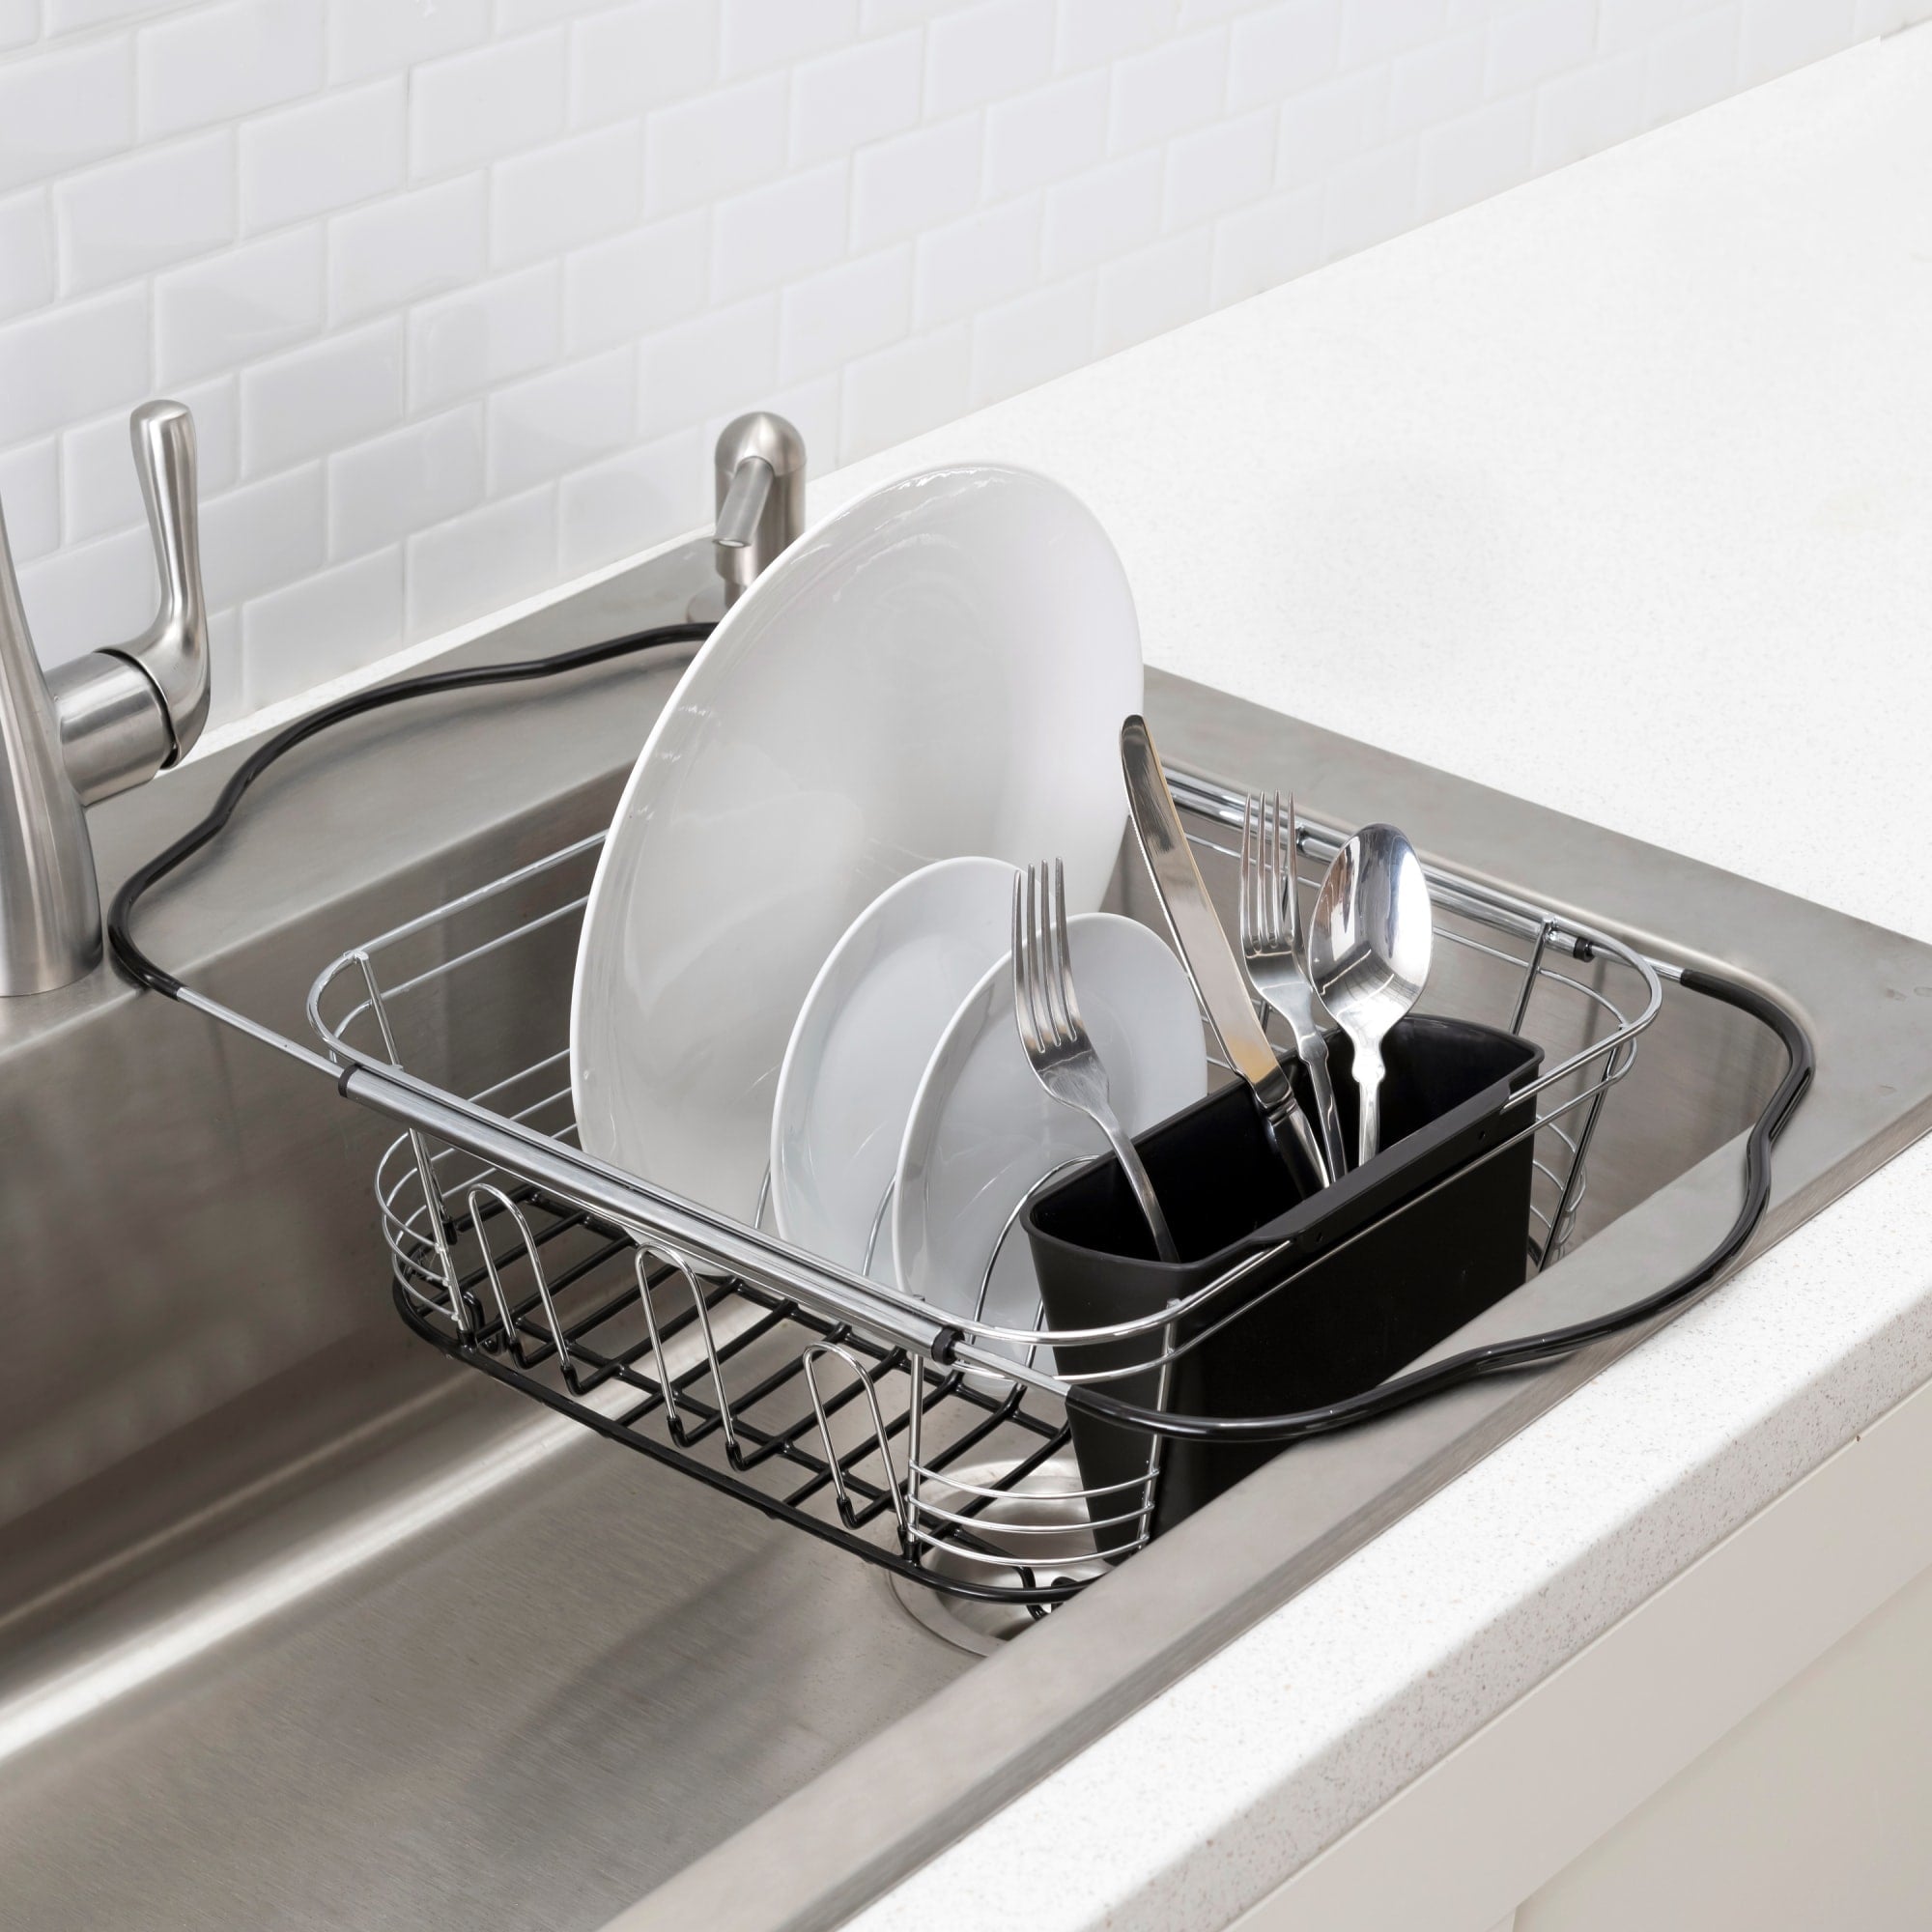 Expandable Dish Rack, Over Sink Dish Rack, Dish Rack And Fruit